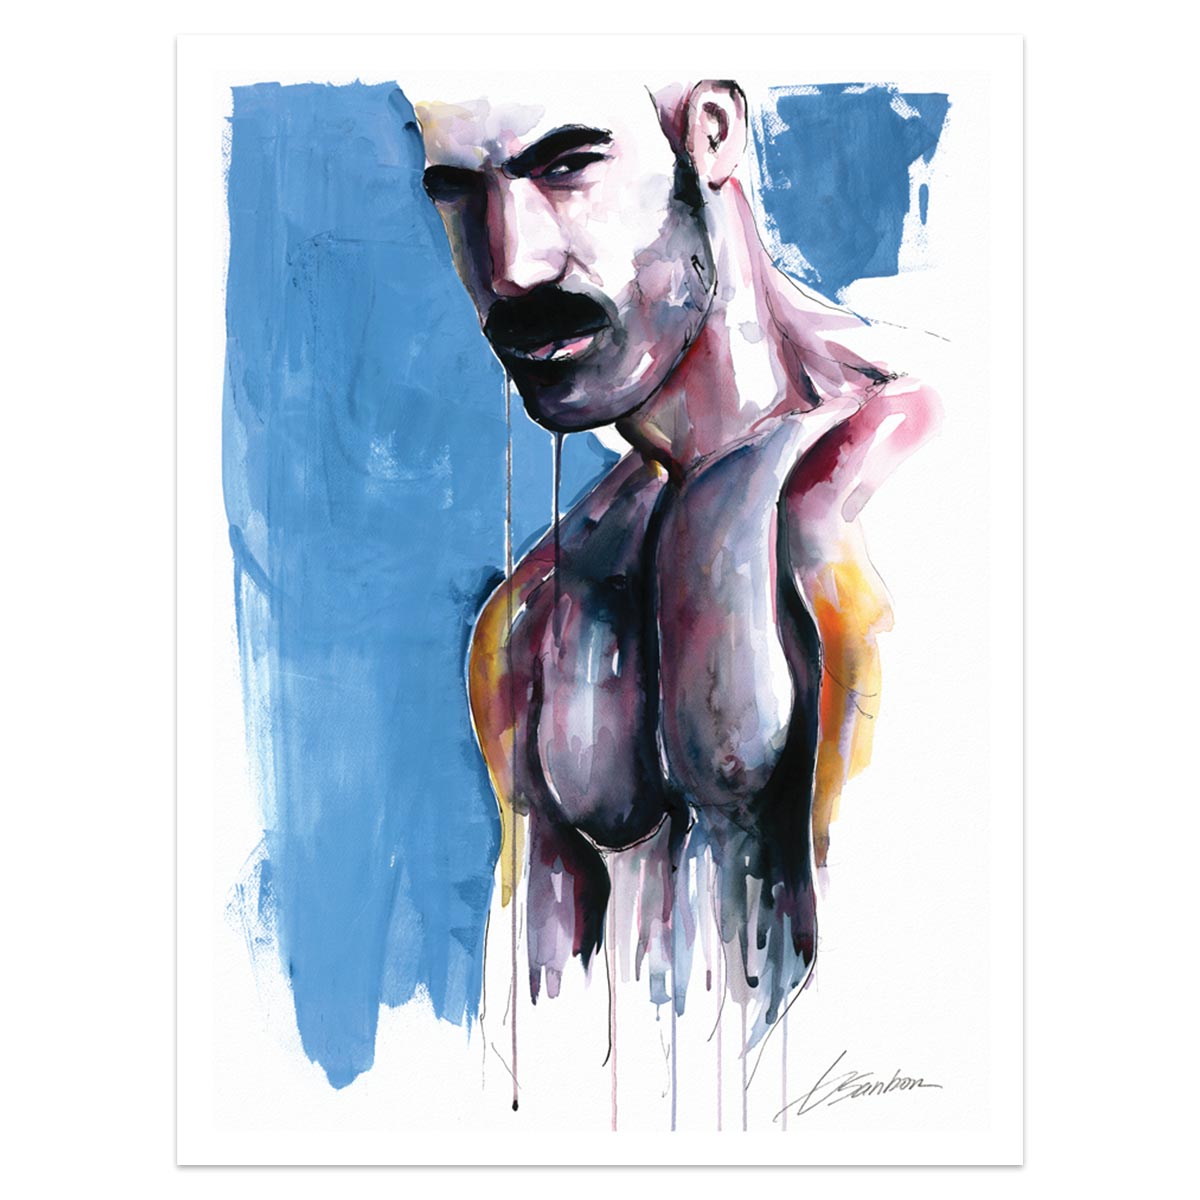 Focused Gaze of a Muscular Man with a Defined Mustache and Hairy Chest - Giclee Art Print